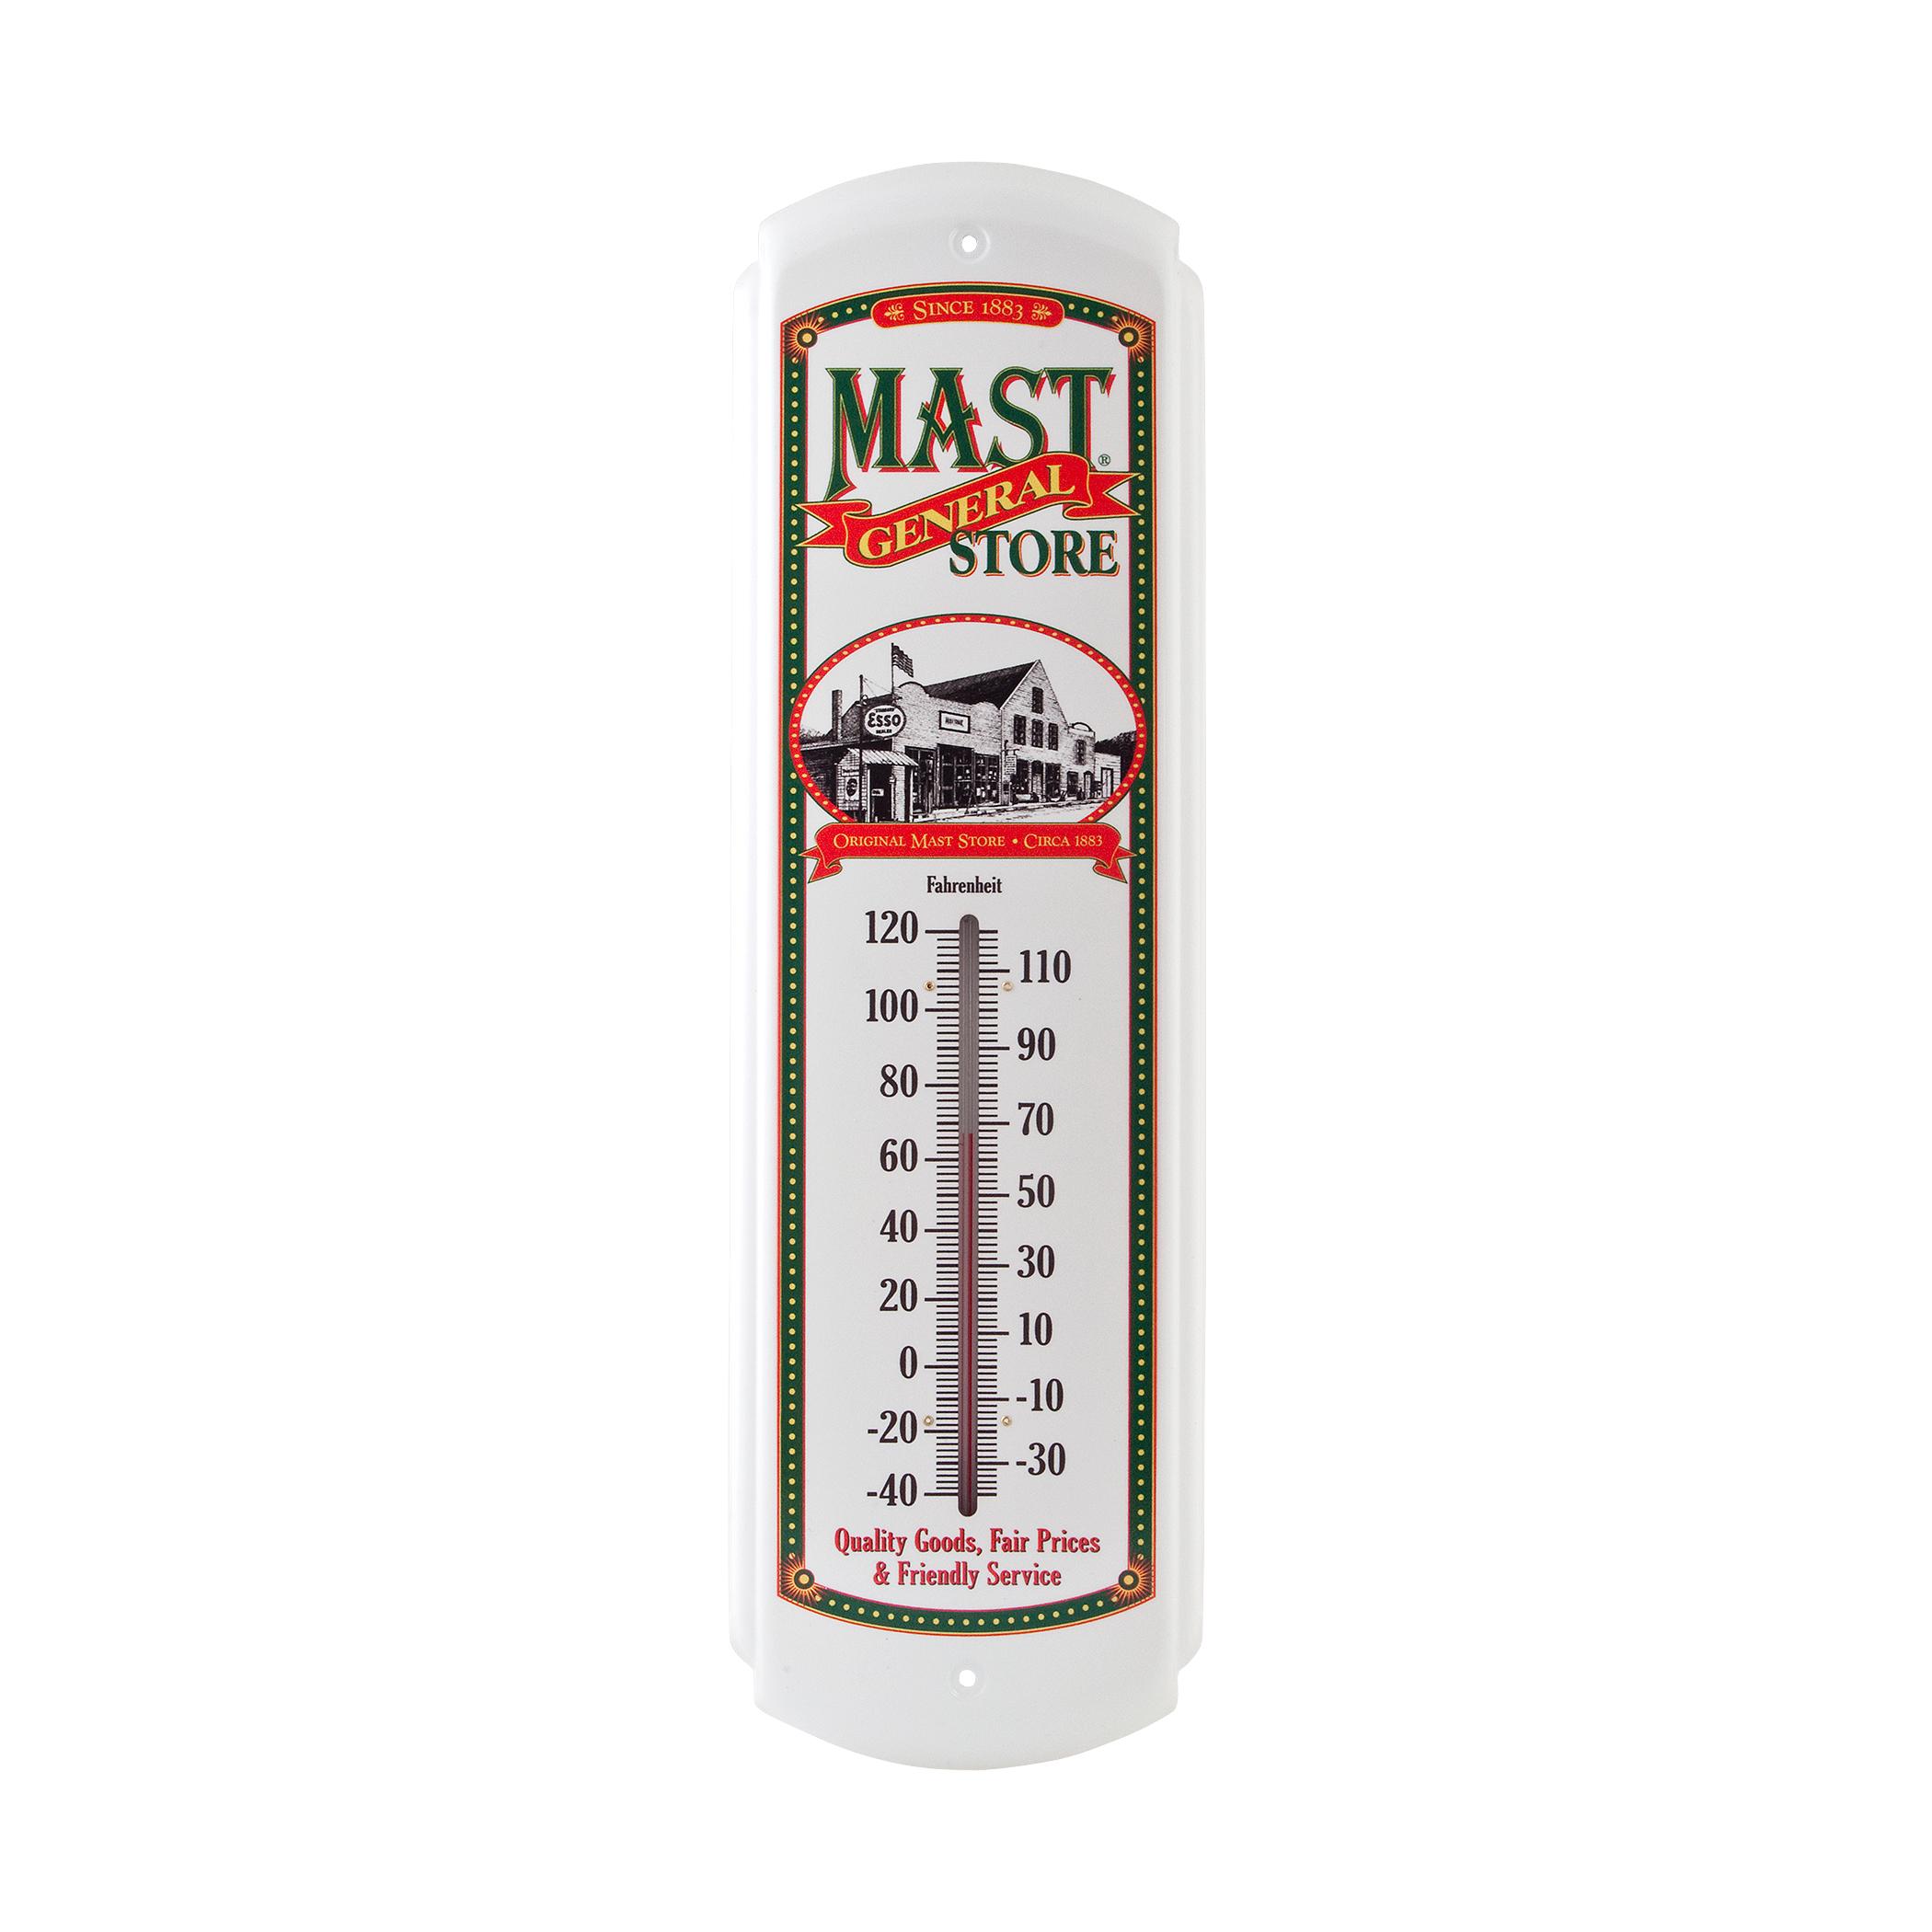  Mast General Store Small Thermometer